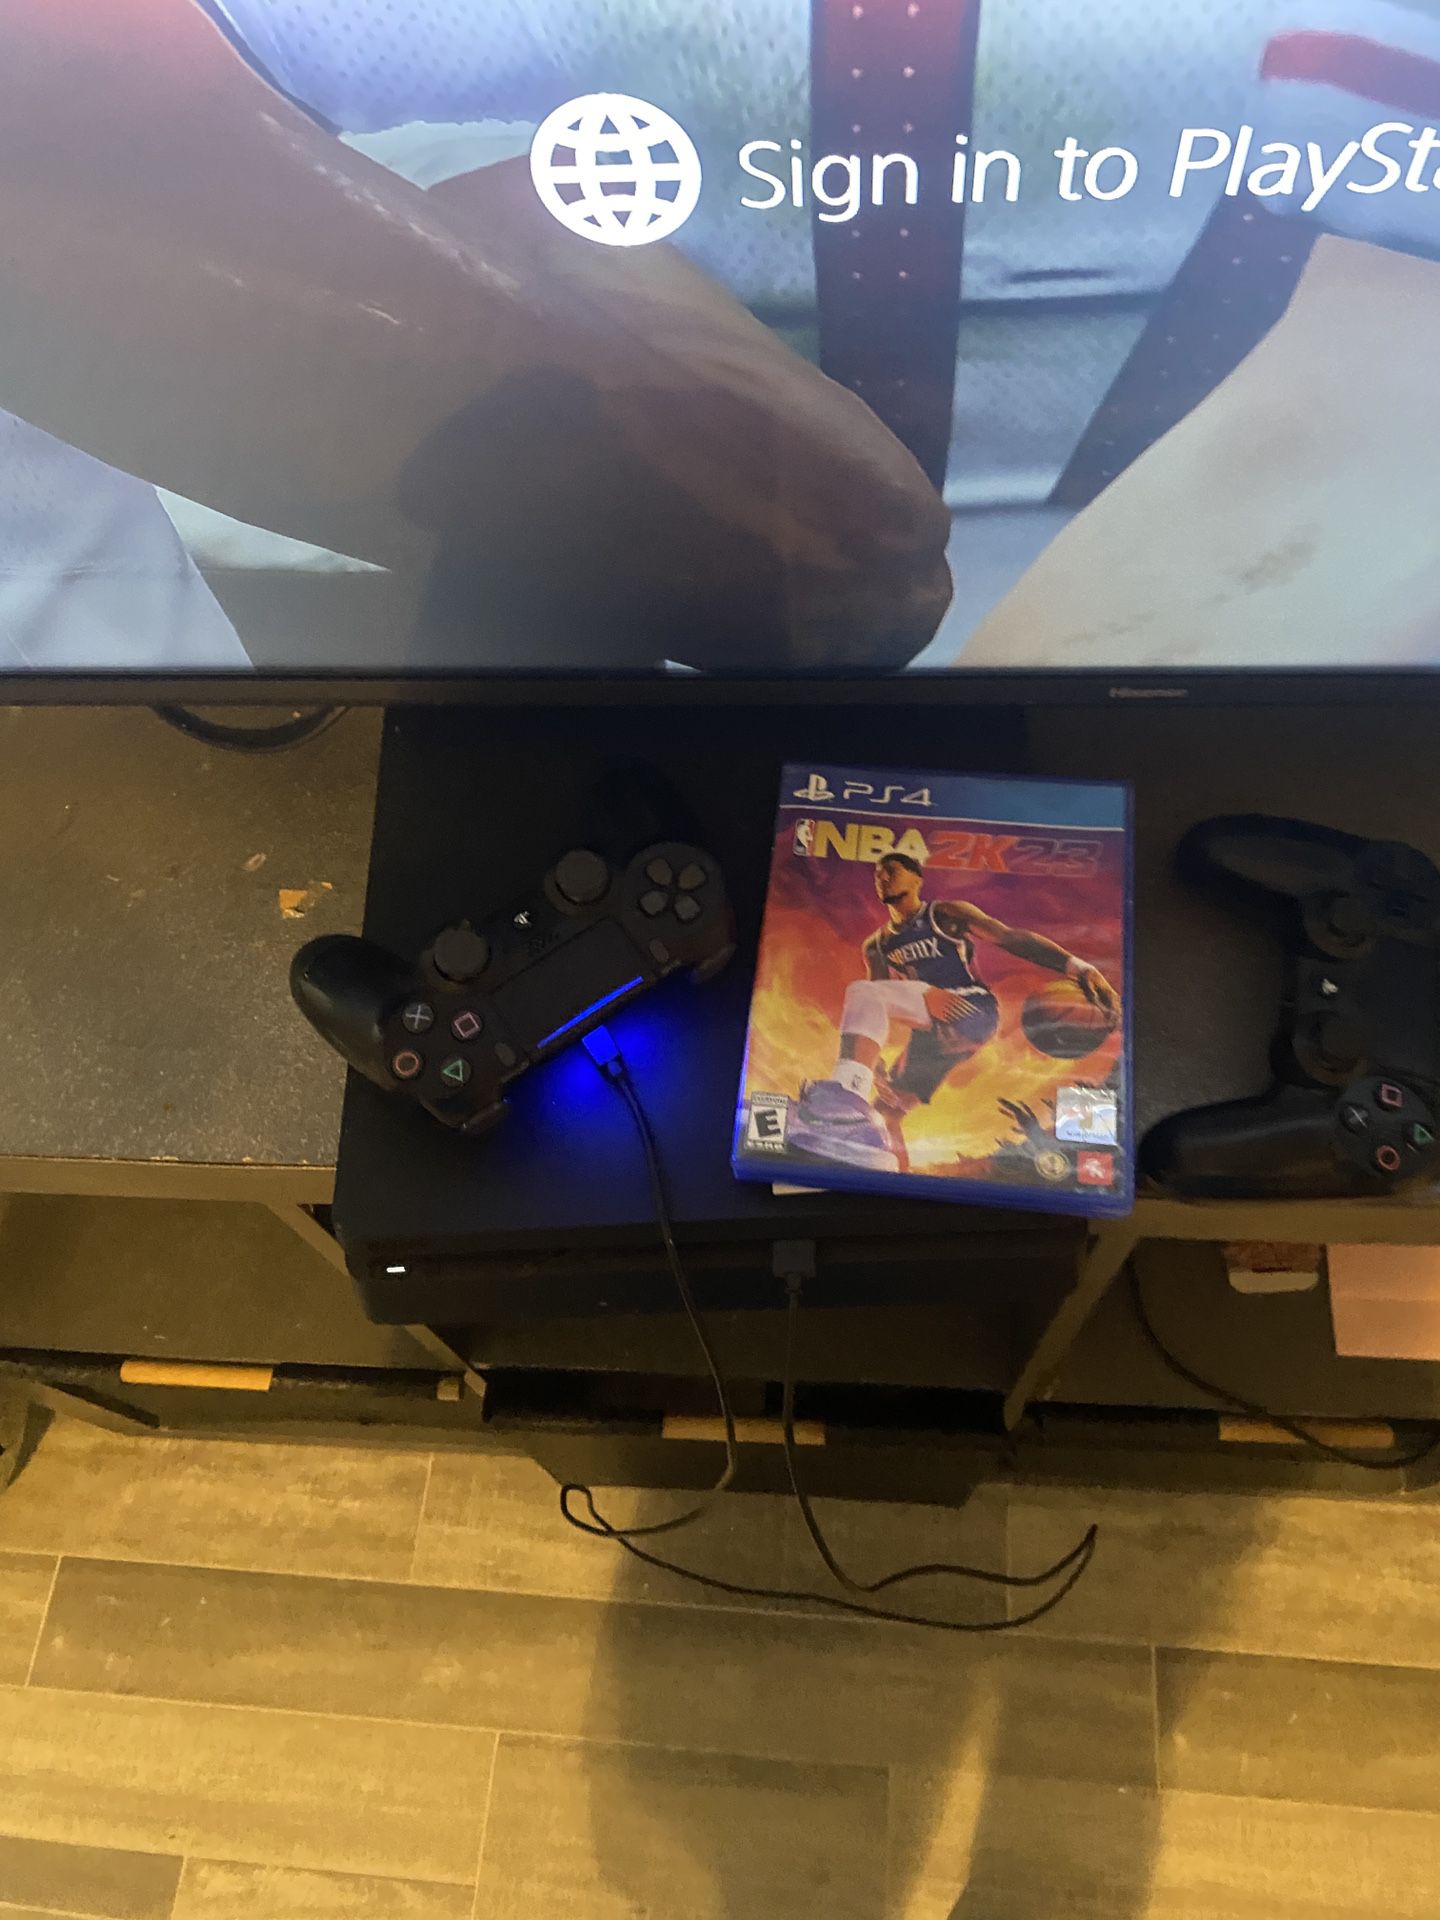 PS4 & 2k23 For $90